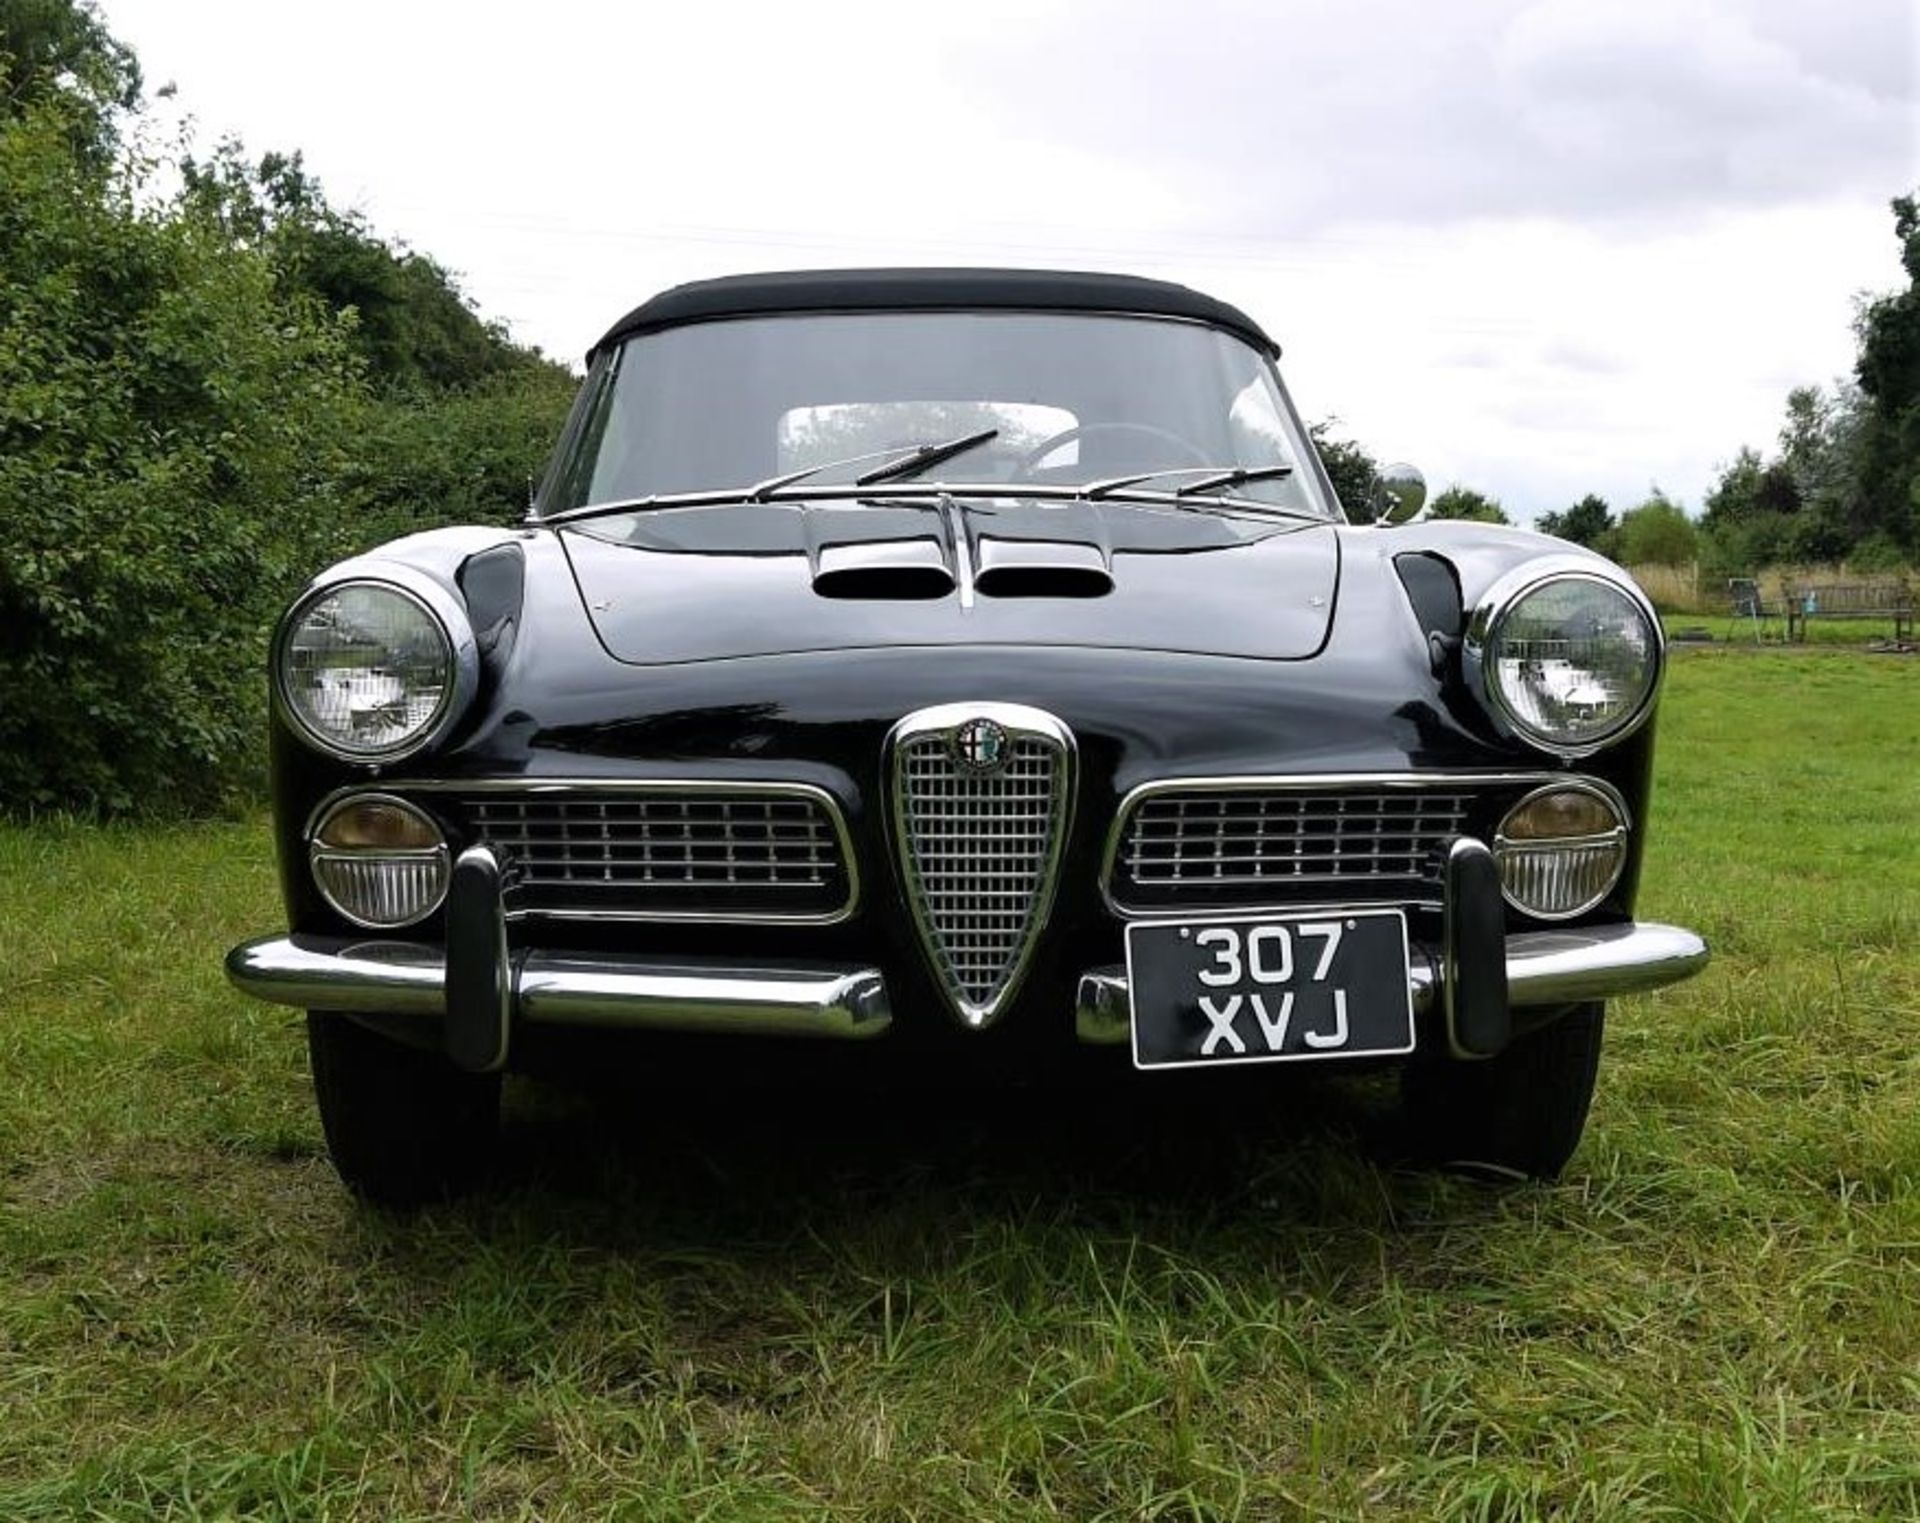 1960 ALFA ROMEO TOURING SPIDER Registration Number: 307 XVJ Chassis Number: AR*10204*000517 Recorded - Image 14 of 36